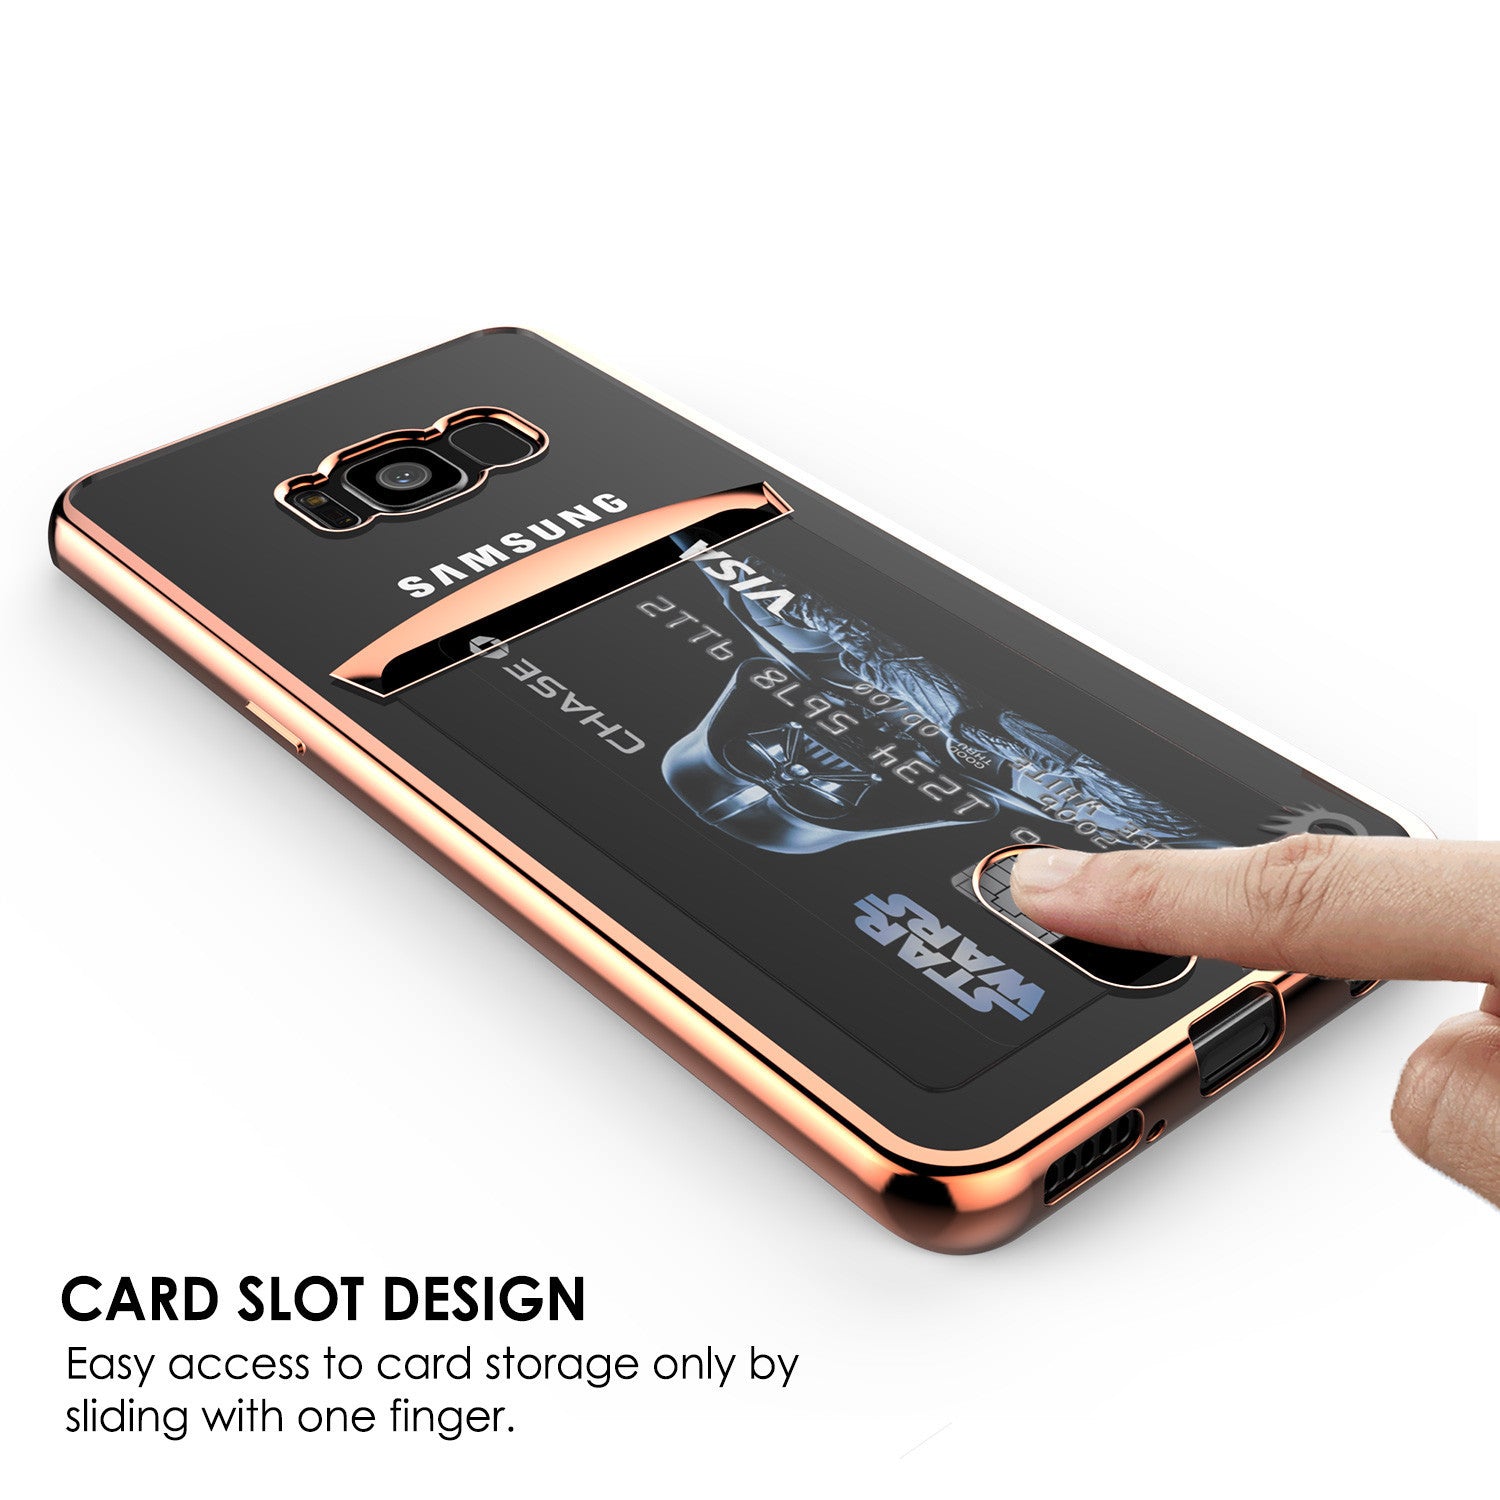 Galaxy S8 Case, PUNKCASE® LUCID Rose Gold Series | Card Slot | SHIELD Screen Protector